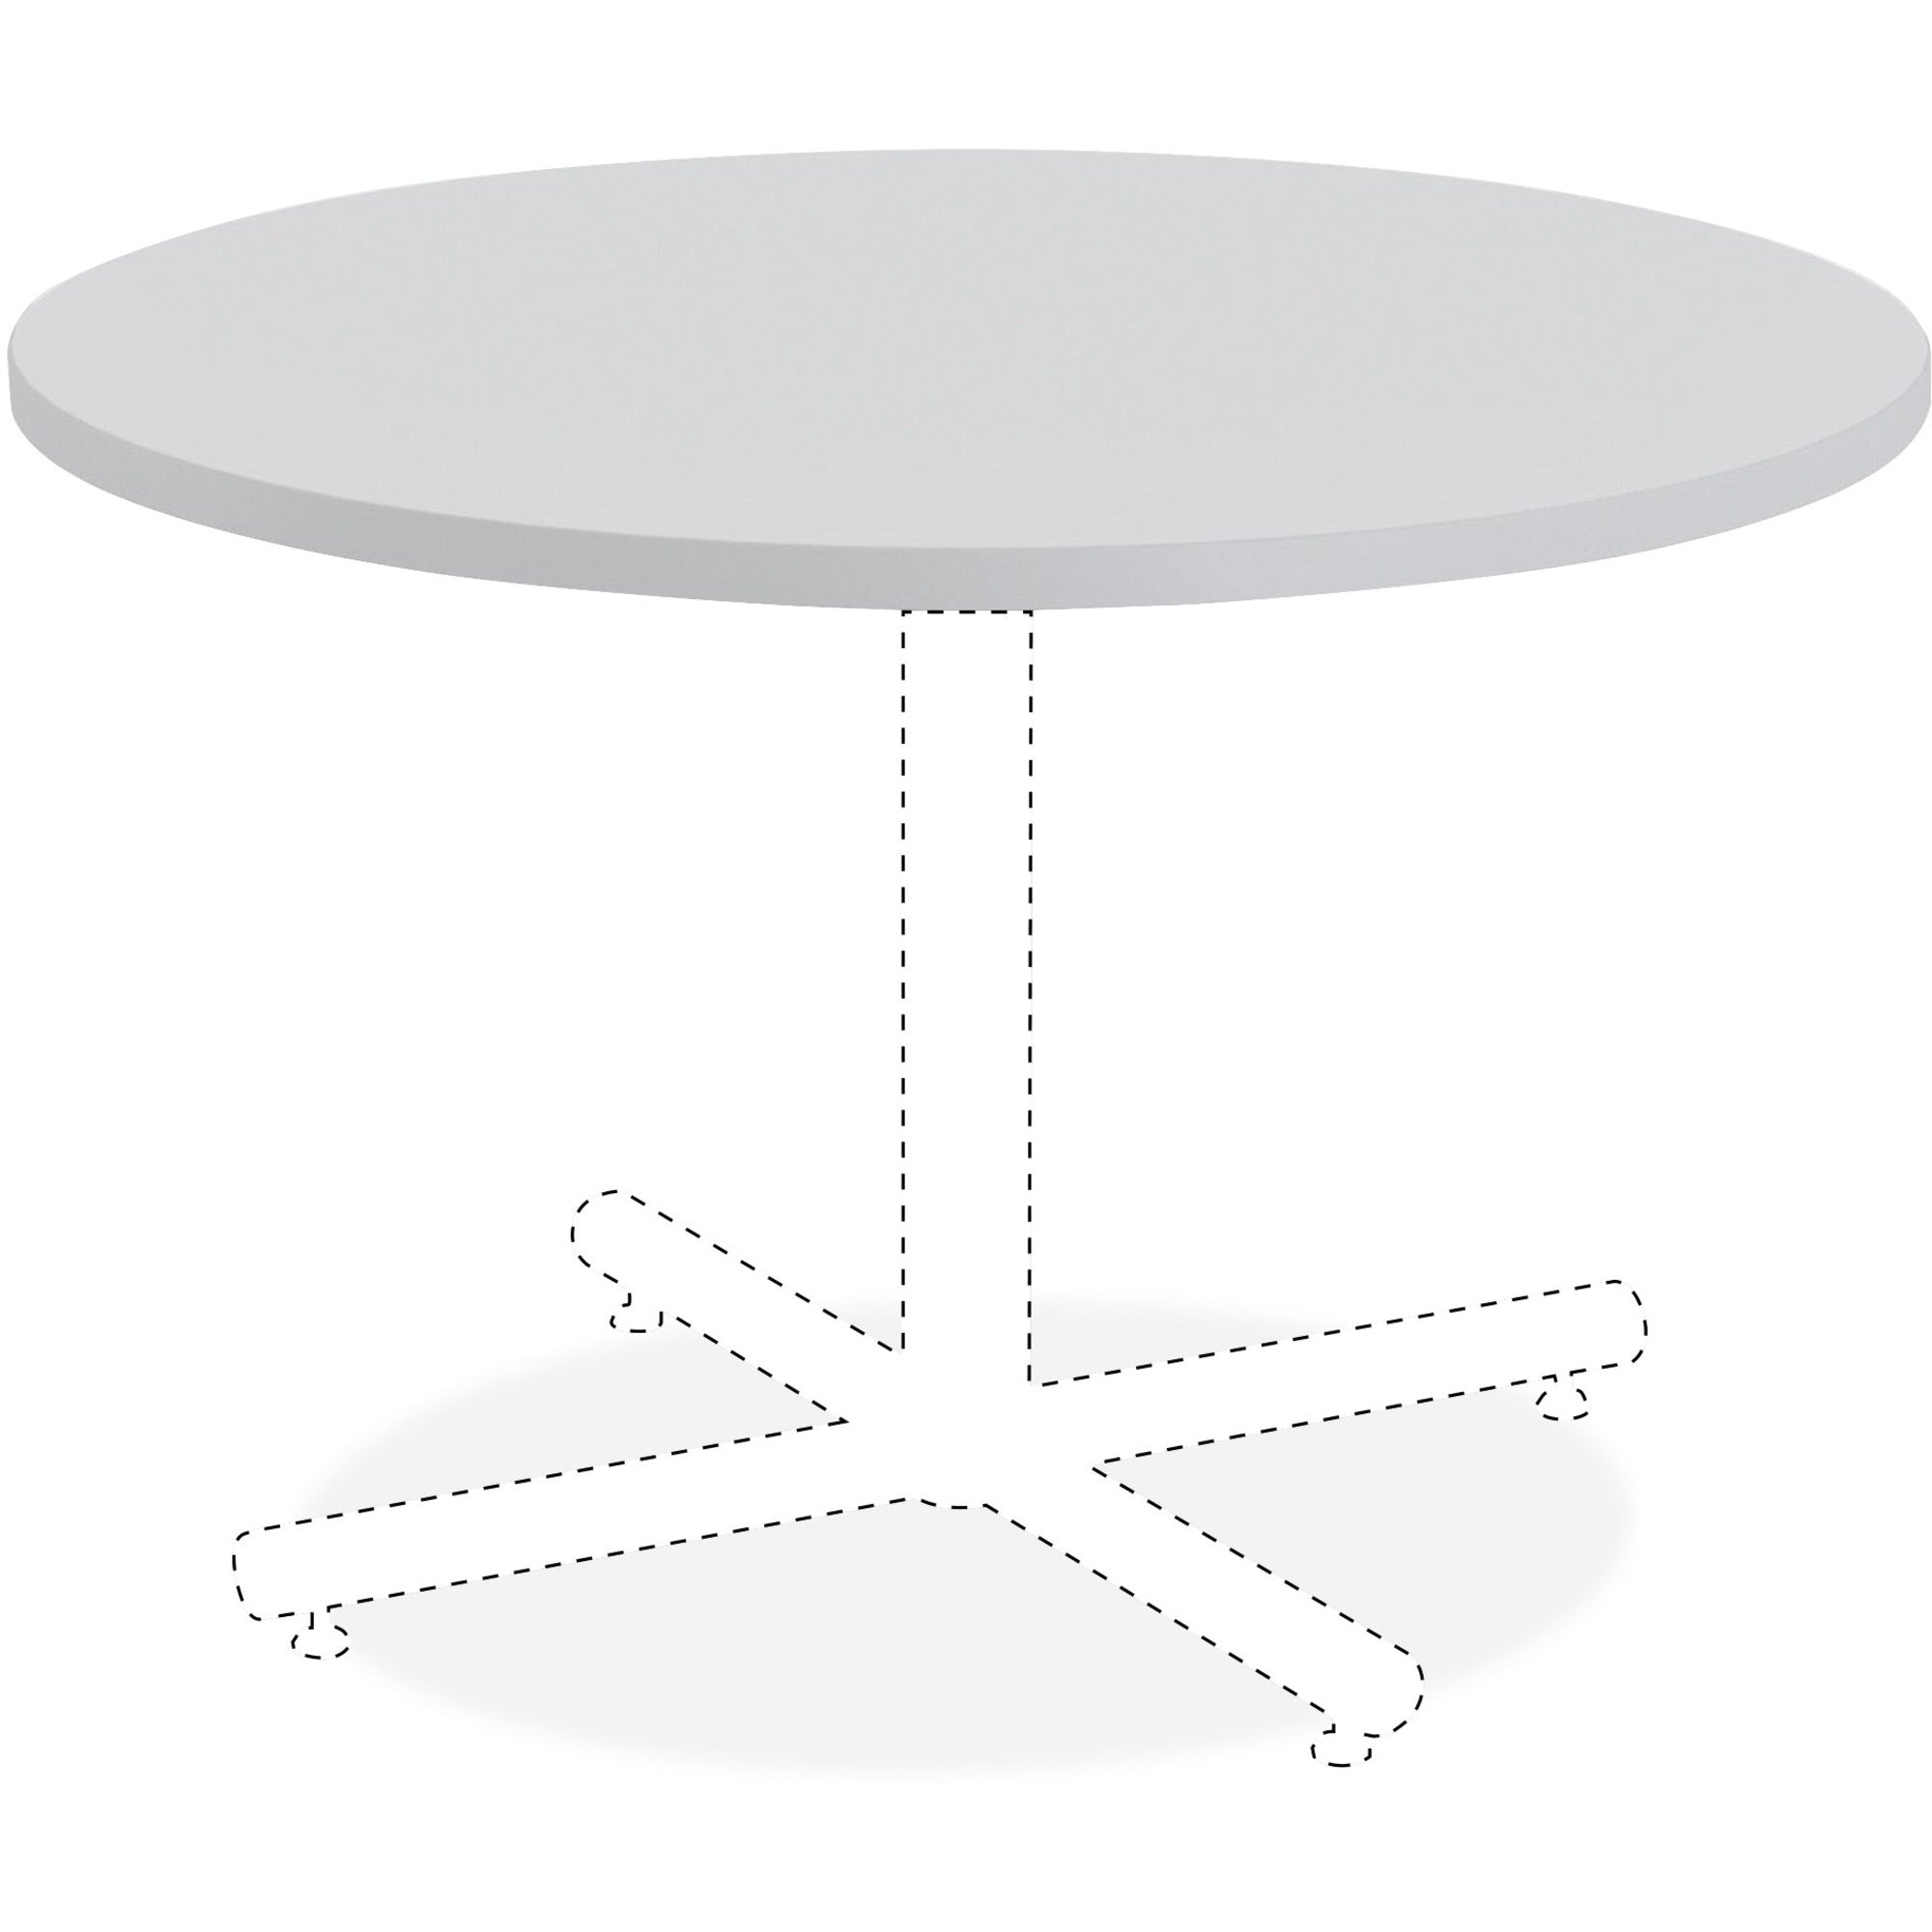 Lorell Hospitality Collection Tabletop - For - Table TopRound Top x 1" Table Top Thickness x 42" Table Top Diameter - Assembly Required - High Pressure Laminate (HPL), Light Gray - Particleboard, Polyvinyl Chloride (PVC) - 1 Each - 